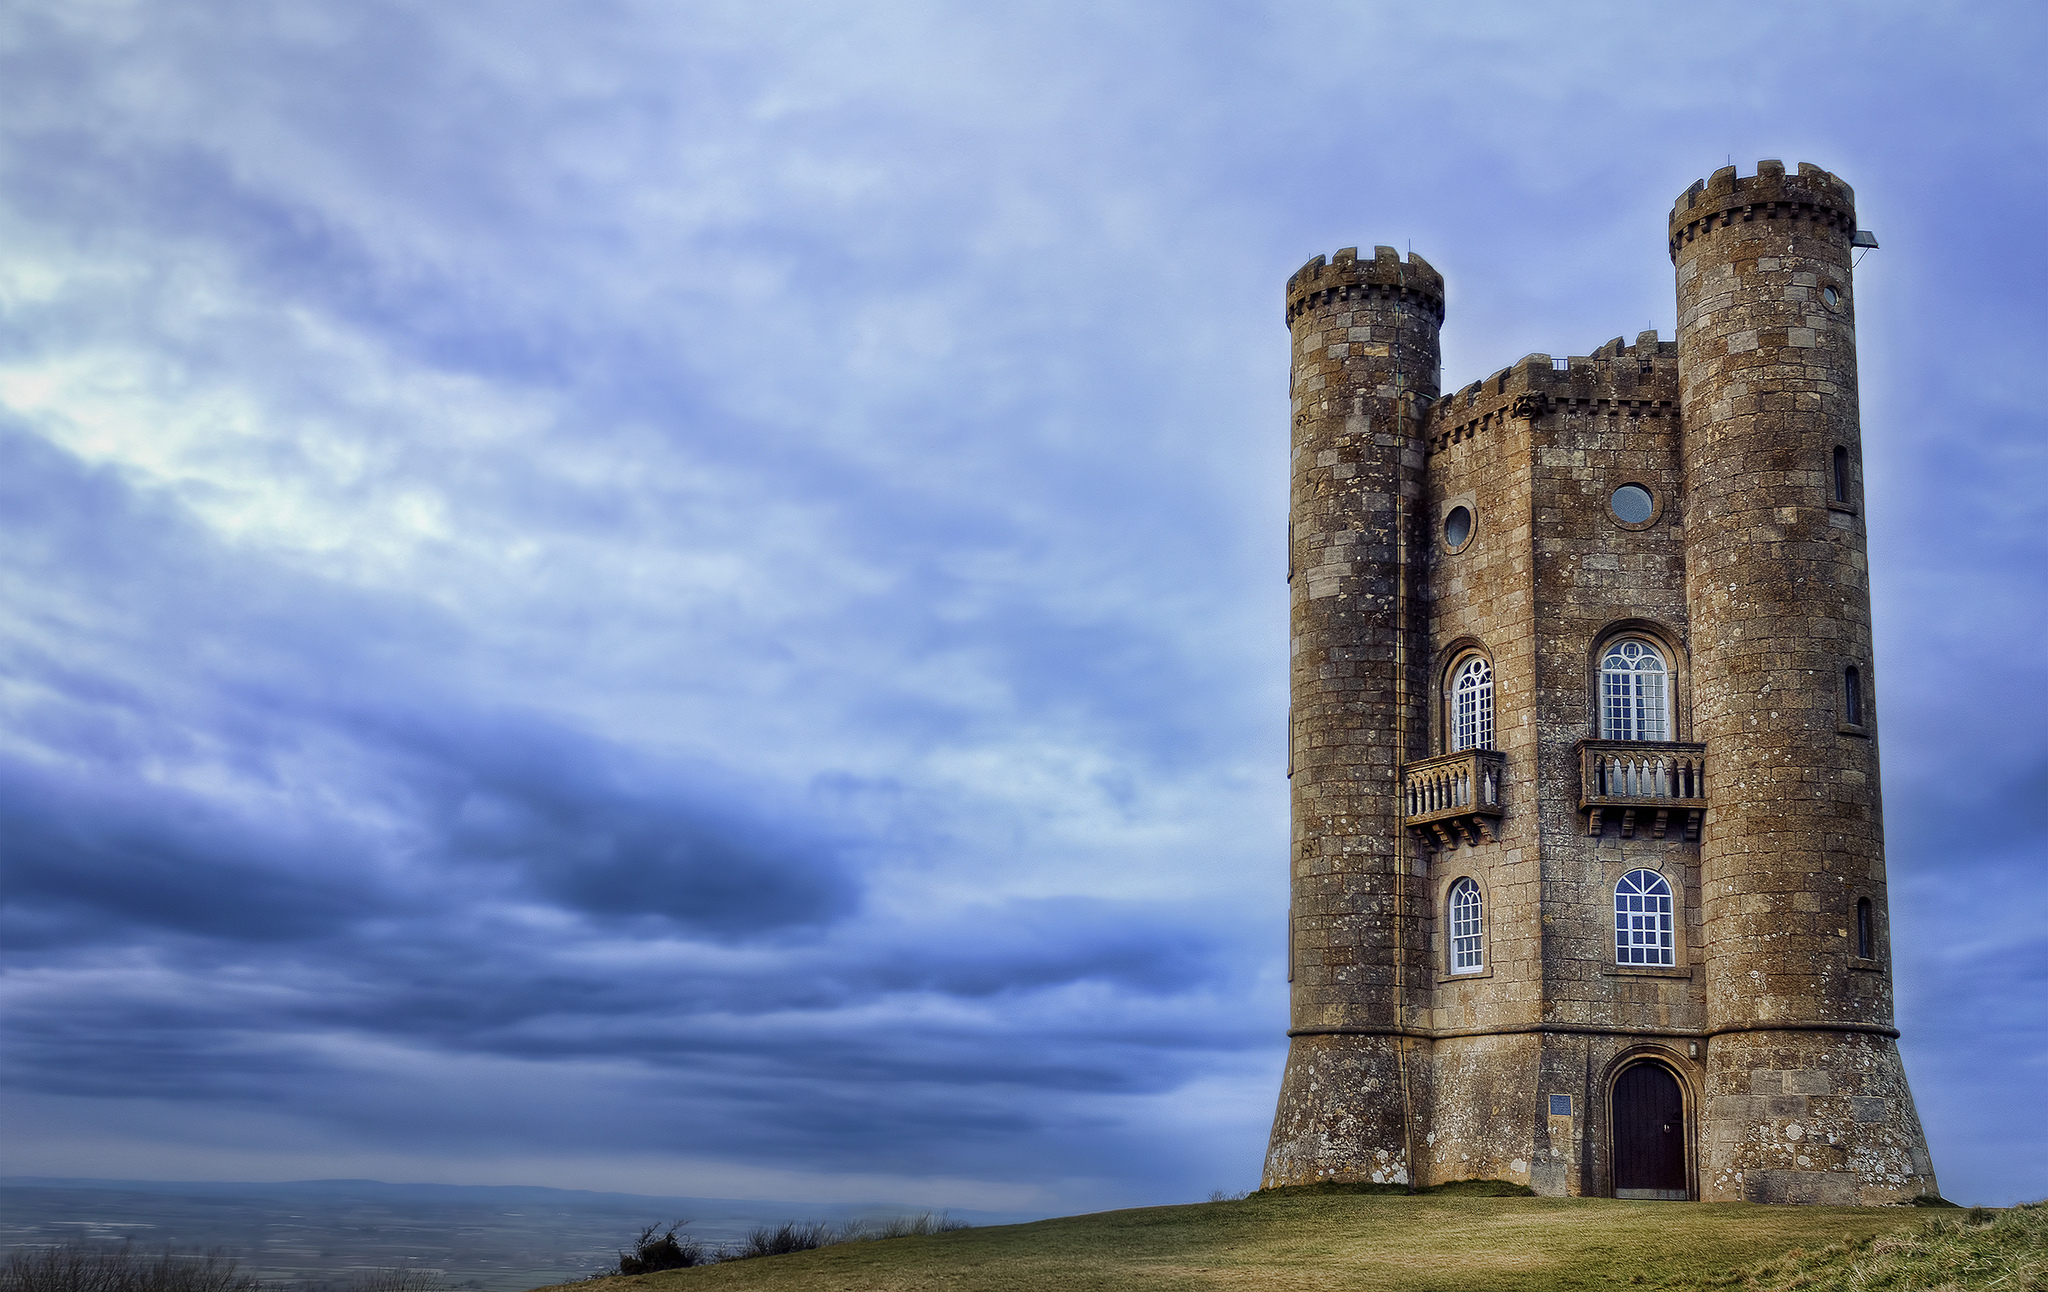 Nice Images Collection: Broadway Tower, Worcestershire Desktop Wallpapers